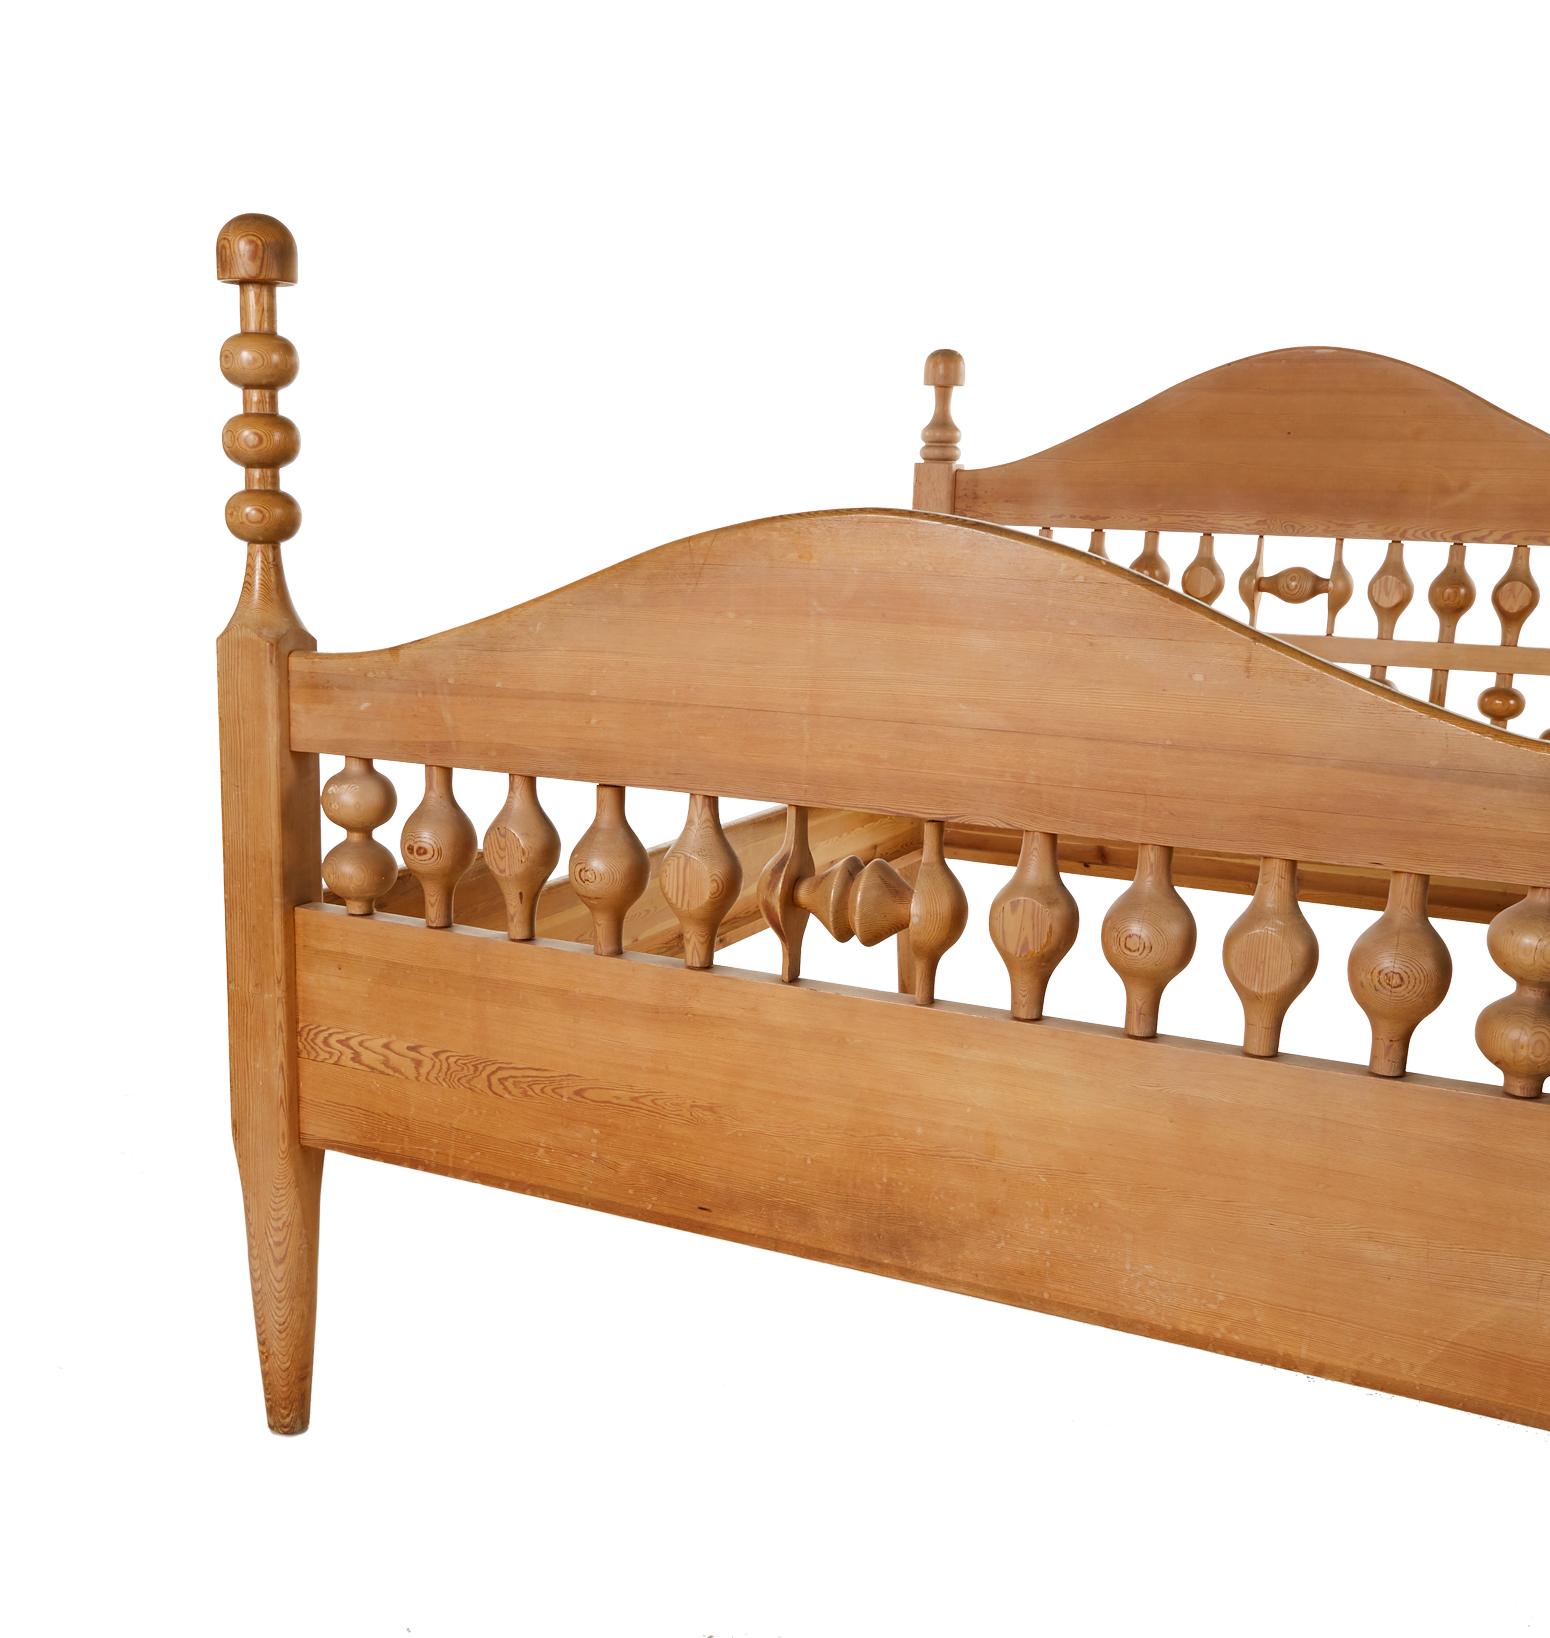 Scandinavian Modern bed by Erik Hoglund (Höglund) made of solid pine for Boda Trä. The bed is an expression of the best the 1970s had to offer and a solid piece made to last forever.
The 1960s major form exhibition in Sweden was 